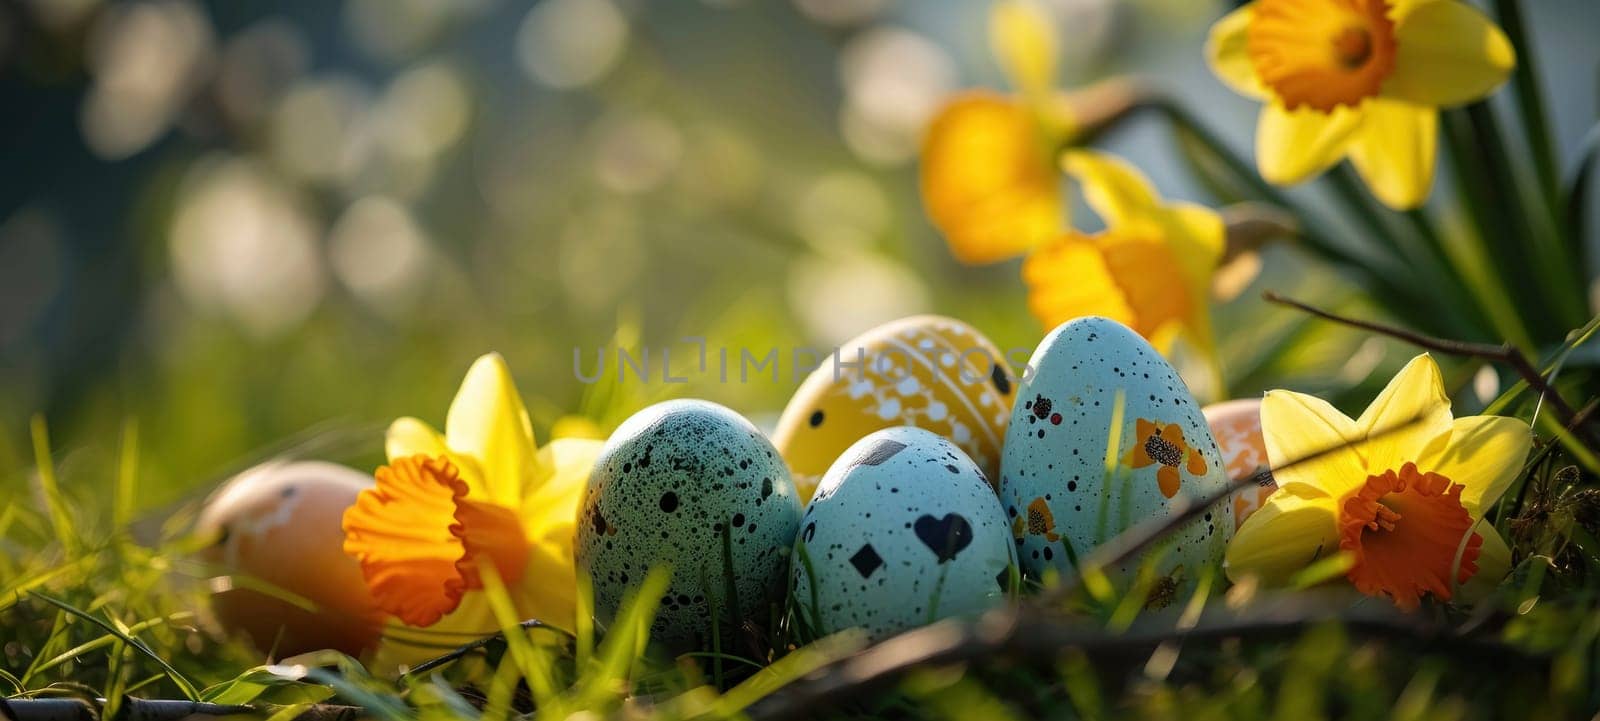 Easter Eggs Nestled Among Spring Daffodils by andreyz